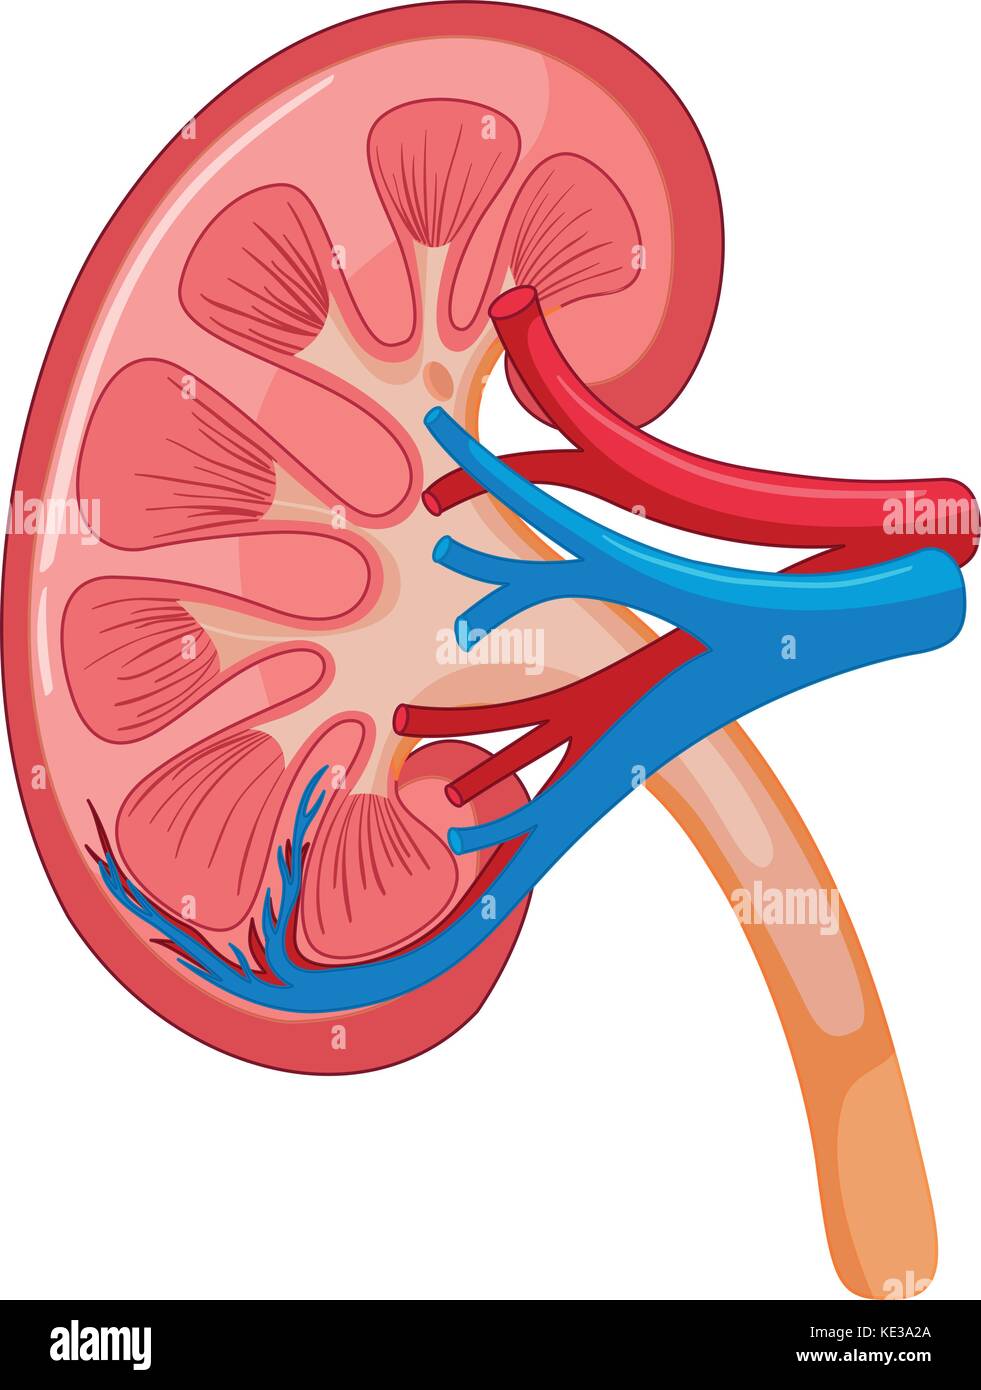 Human Kidney Medical Diagram High Resolution Stock Photography and